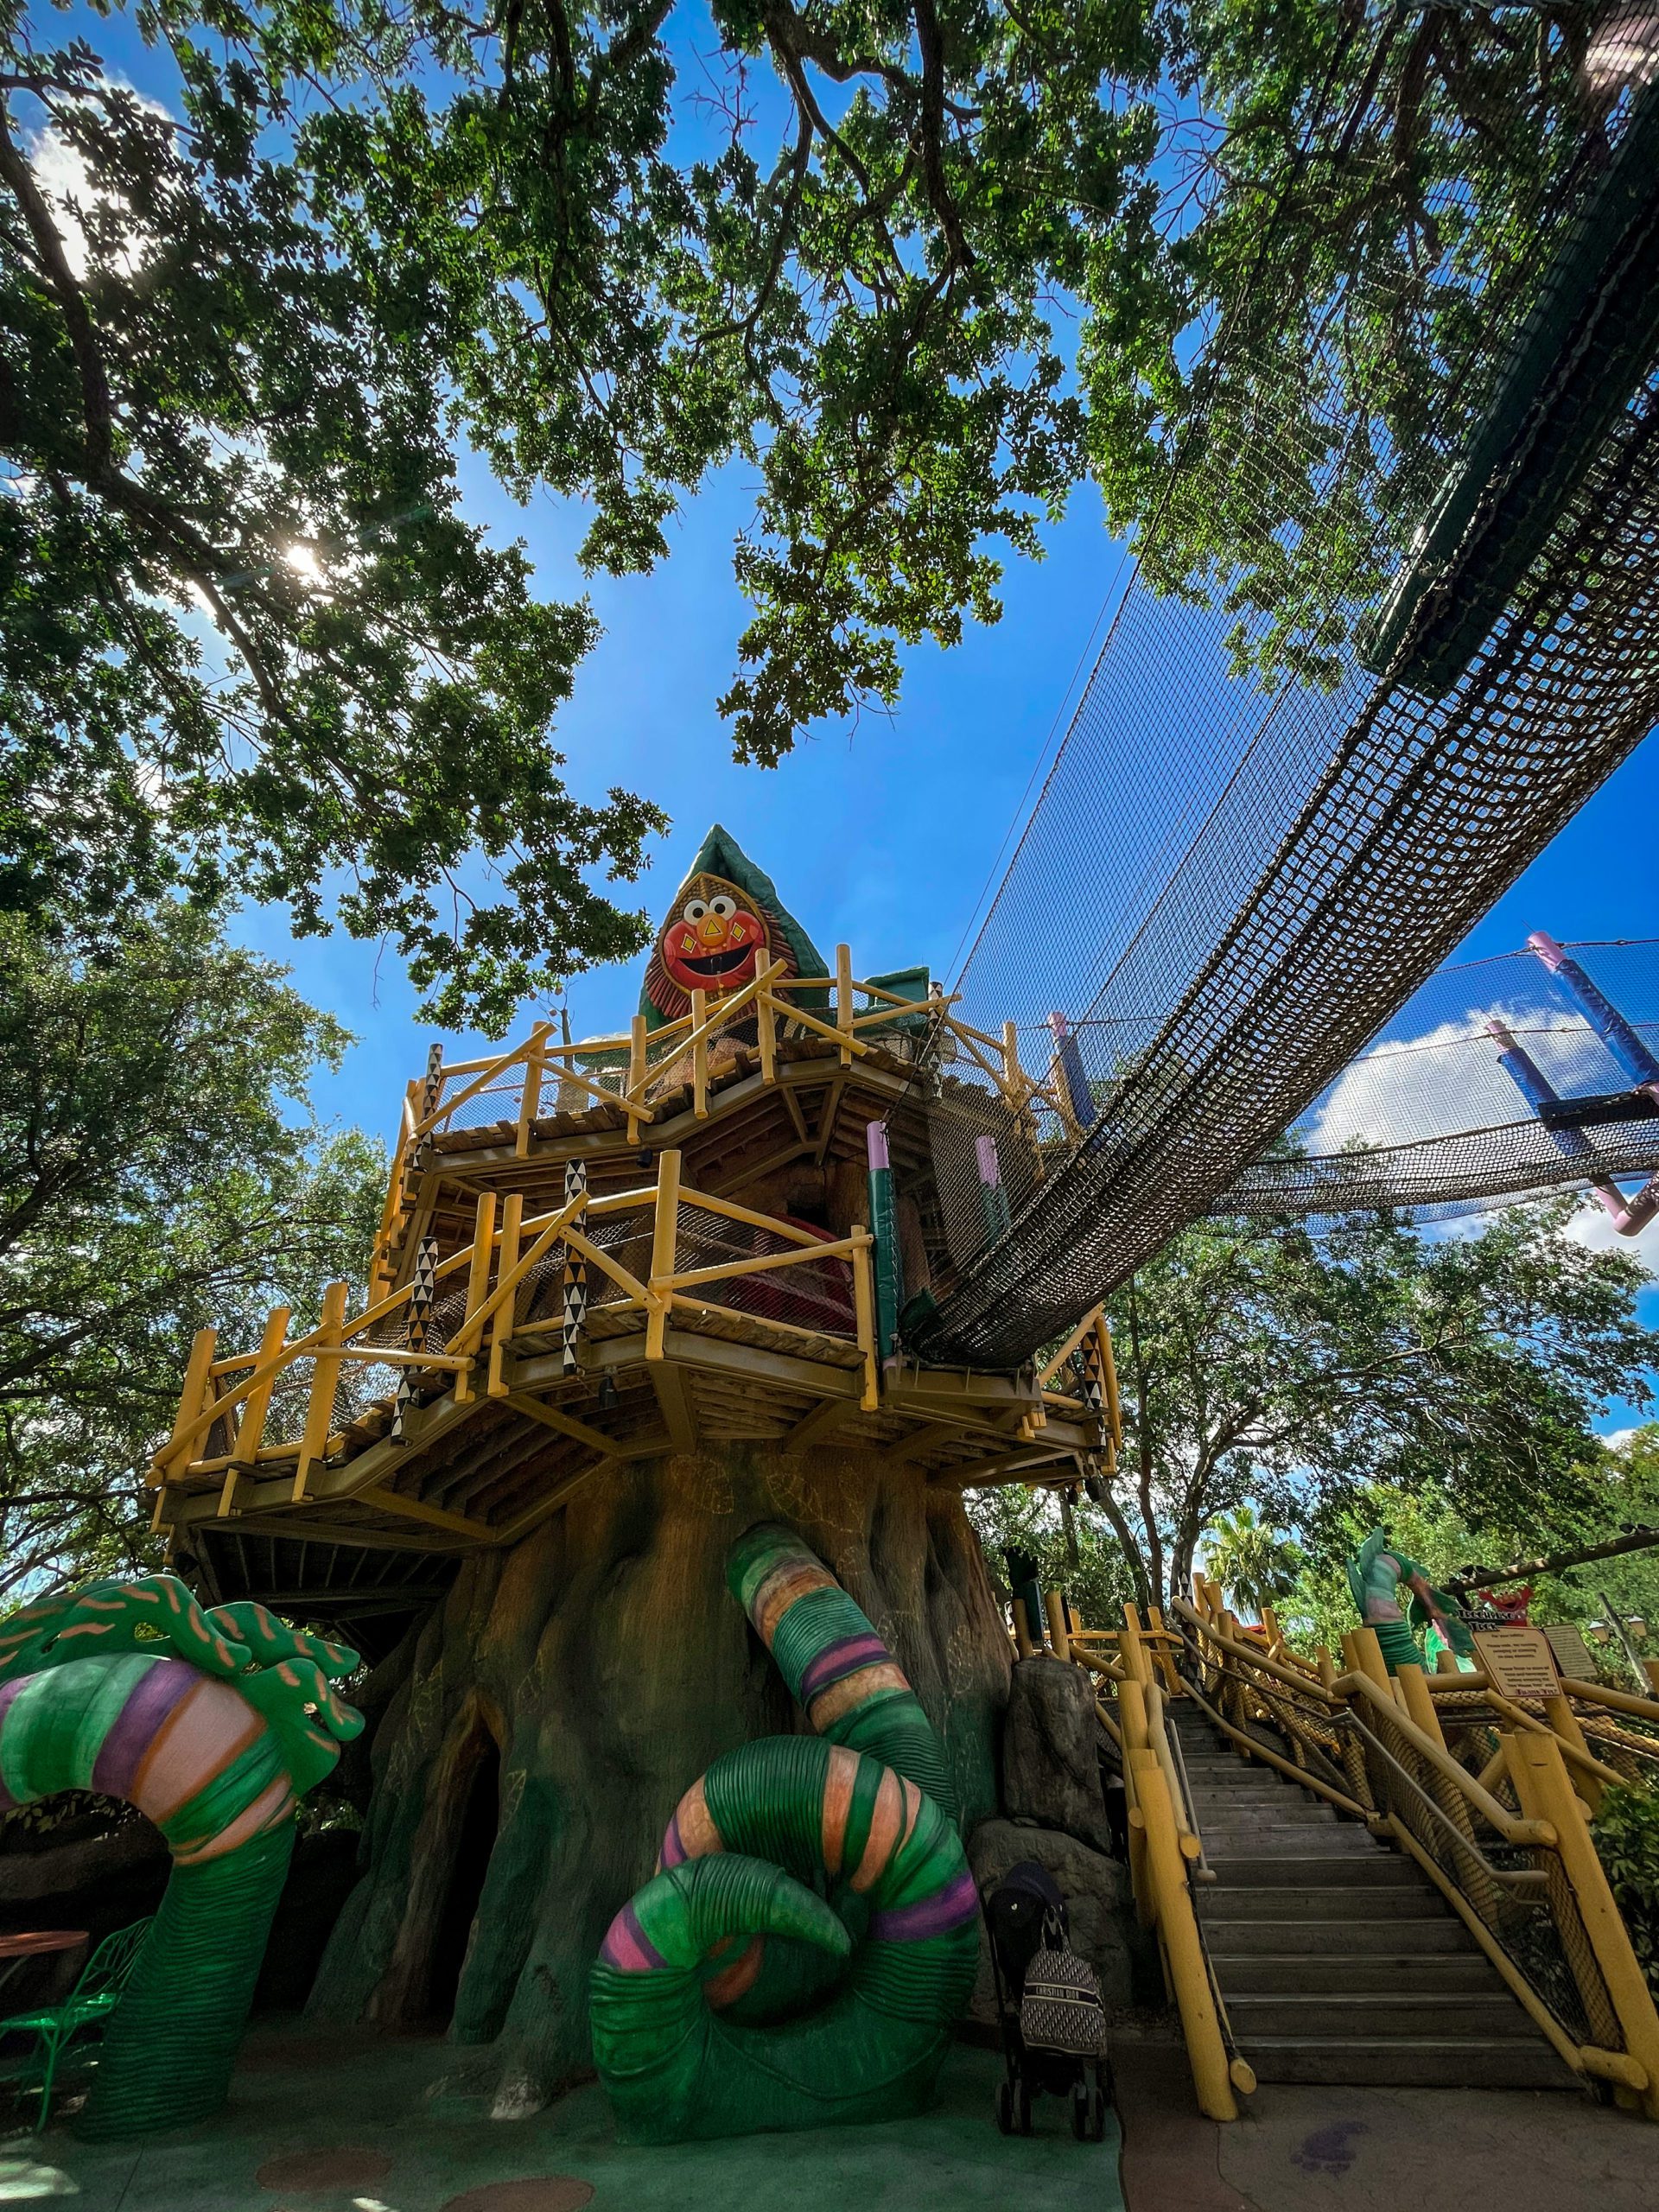 A Sesame Street-themed play area at Busch Gardens® Tampa Bay, one of the best things to do in Tampa Bay with kids.